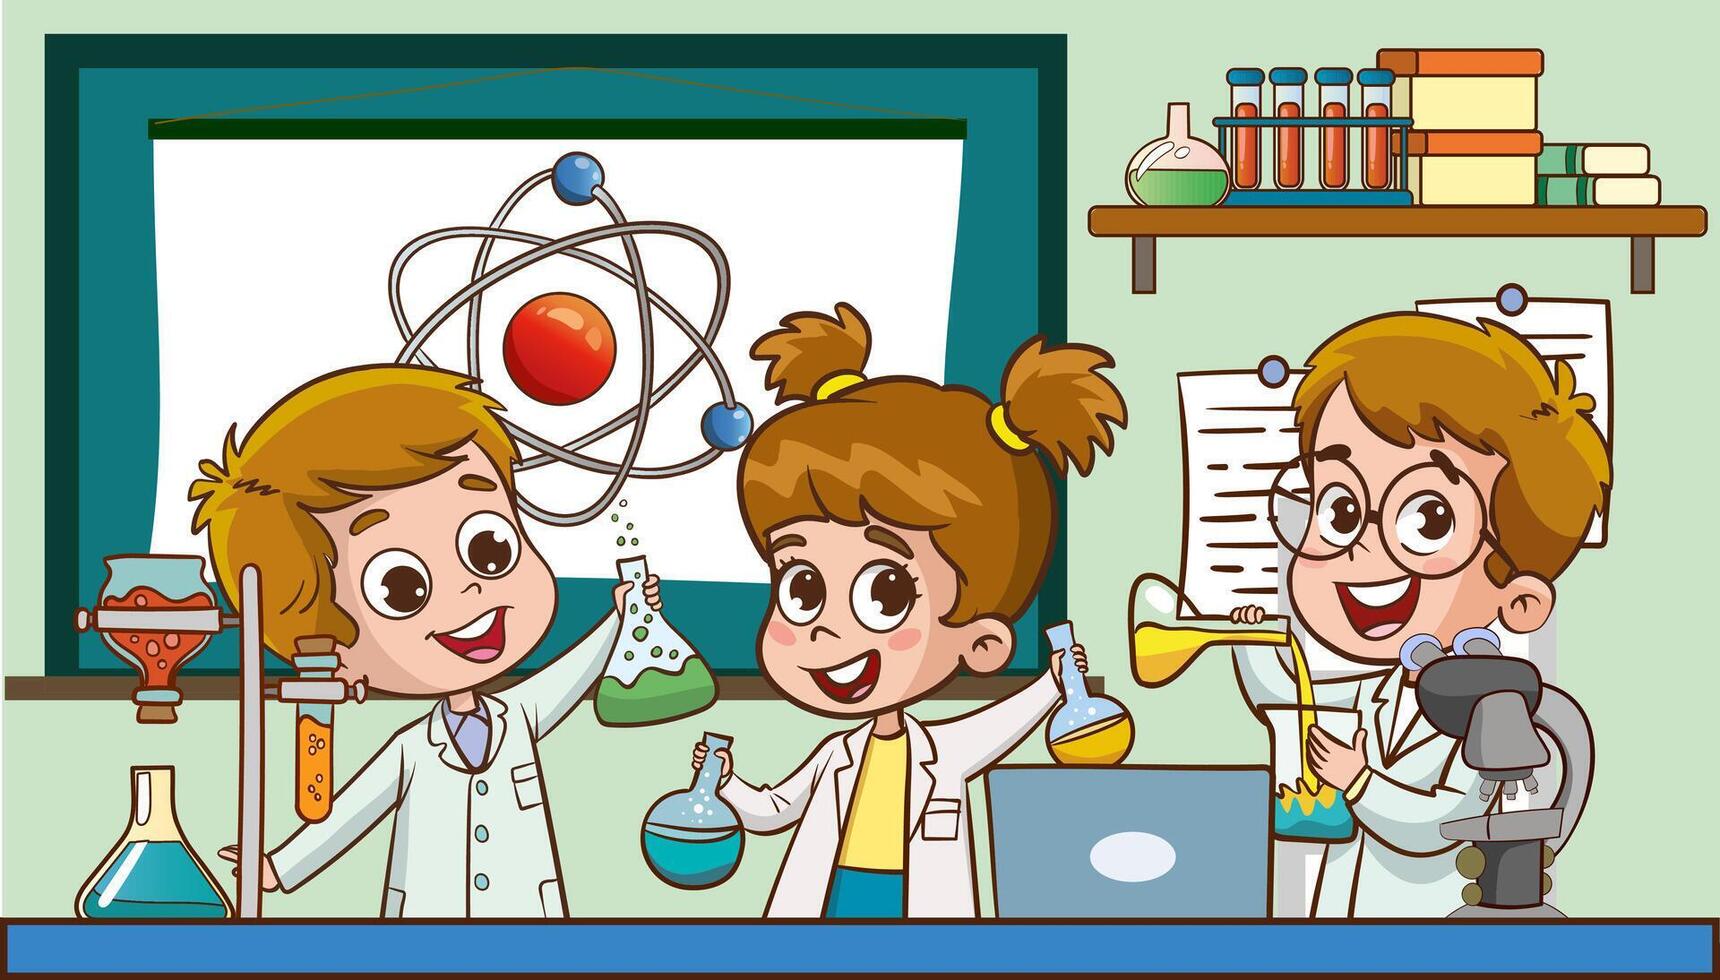 little scientist wearing with coat and do research cartoon vector